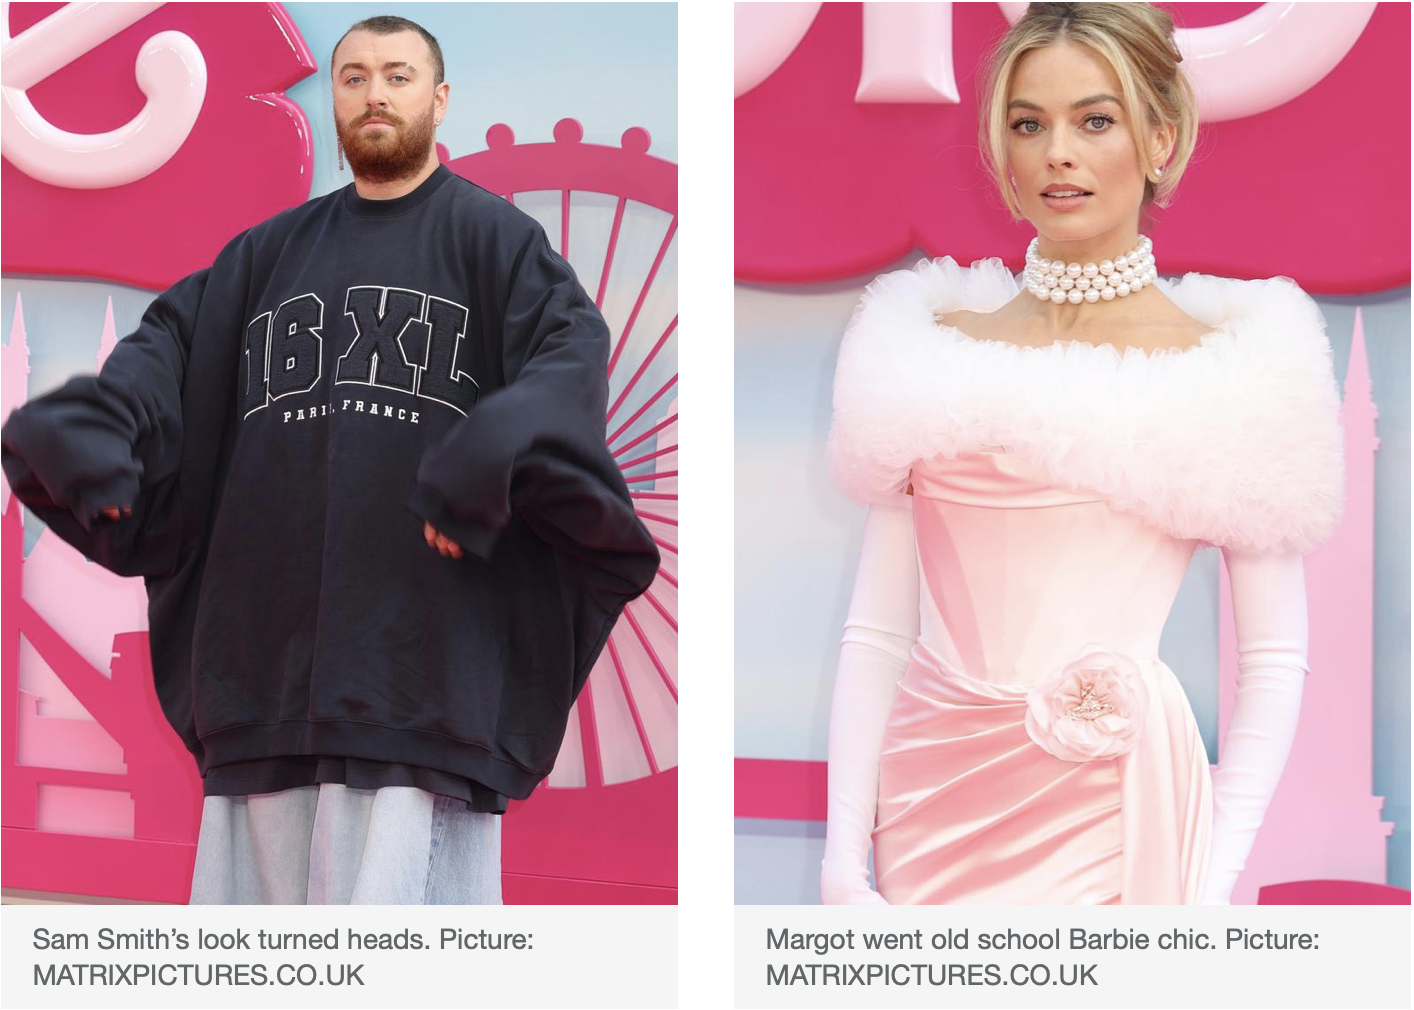 Margot Robbie and Sam Smith’s outfits were very different for the Barbie premiere